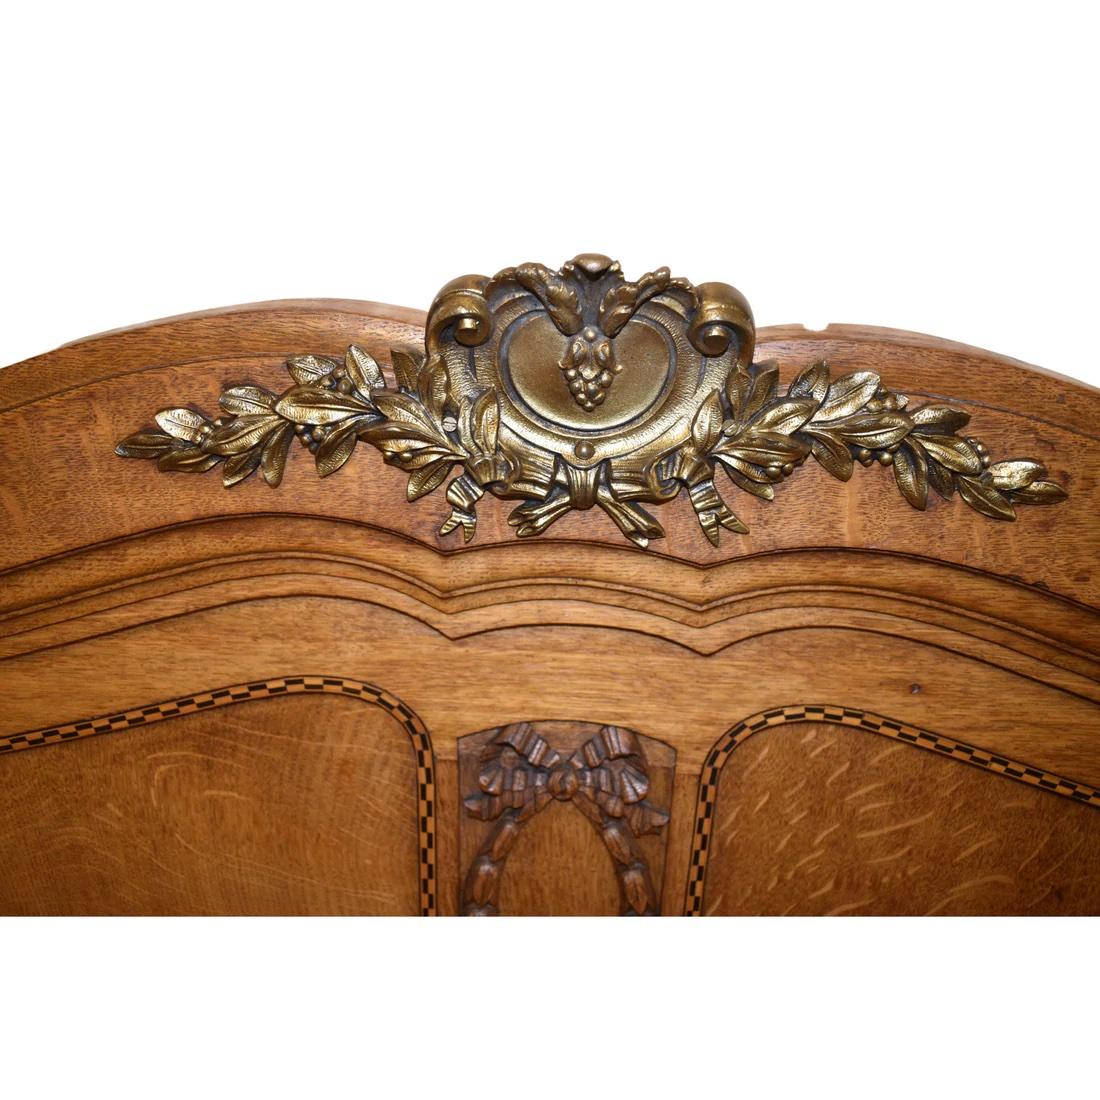 Antique French double bed with gilt and tumbridge ware inlay, brass centre detail and detailed carved ribbons to both front and head boards.

Also Available matching bed side table

Size: Double bed

Circa: 1890

Material: Oak

Country of